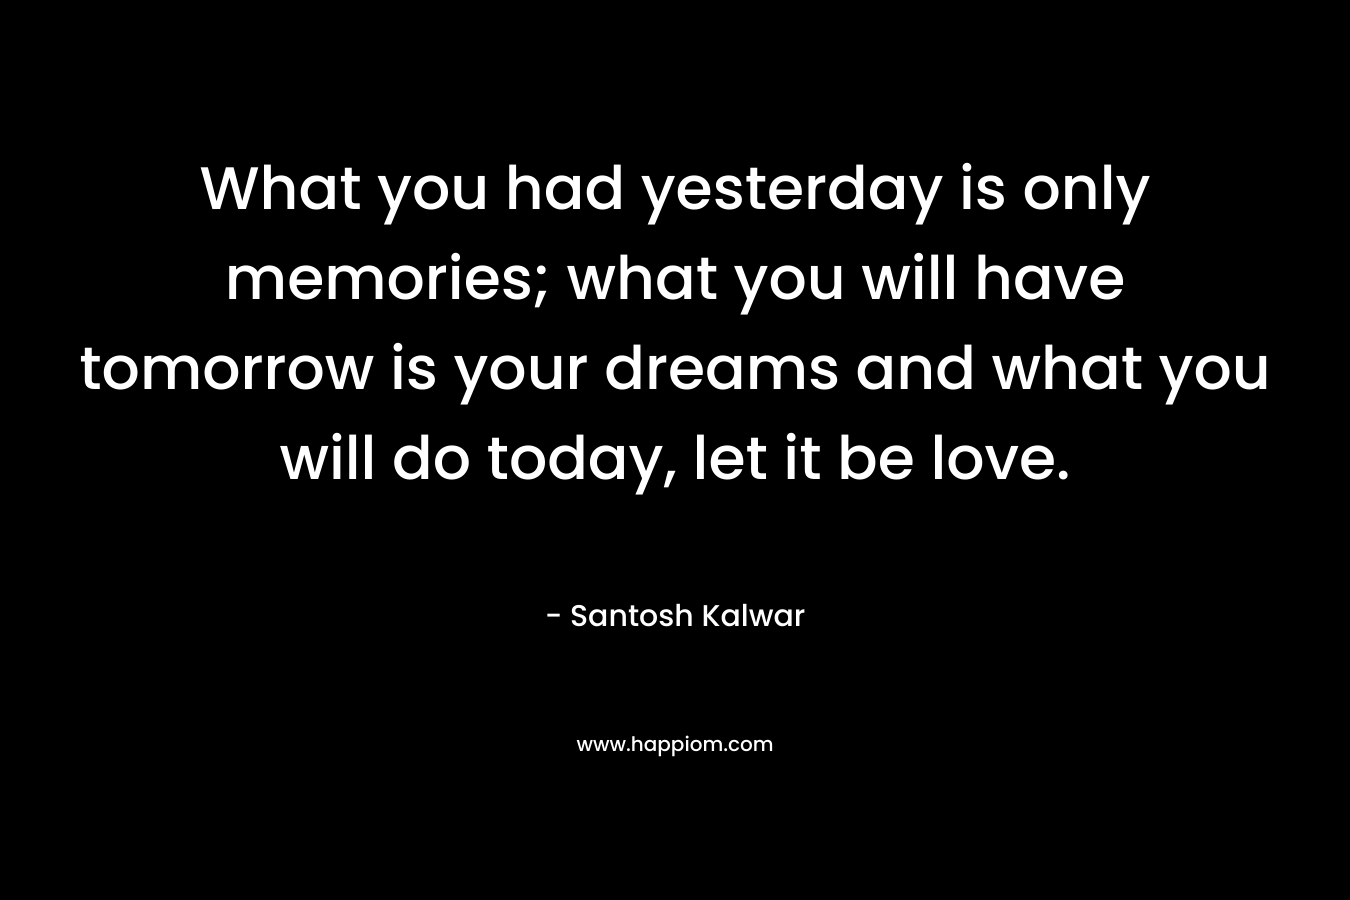 What you had yesterday is only memories; what you will have tomorrow is your dreams and what you will do today, let it be love.